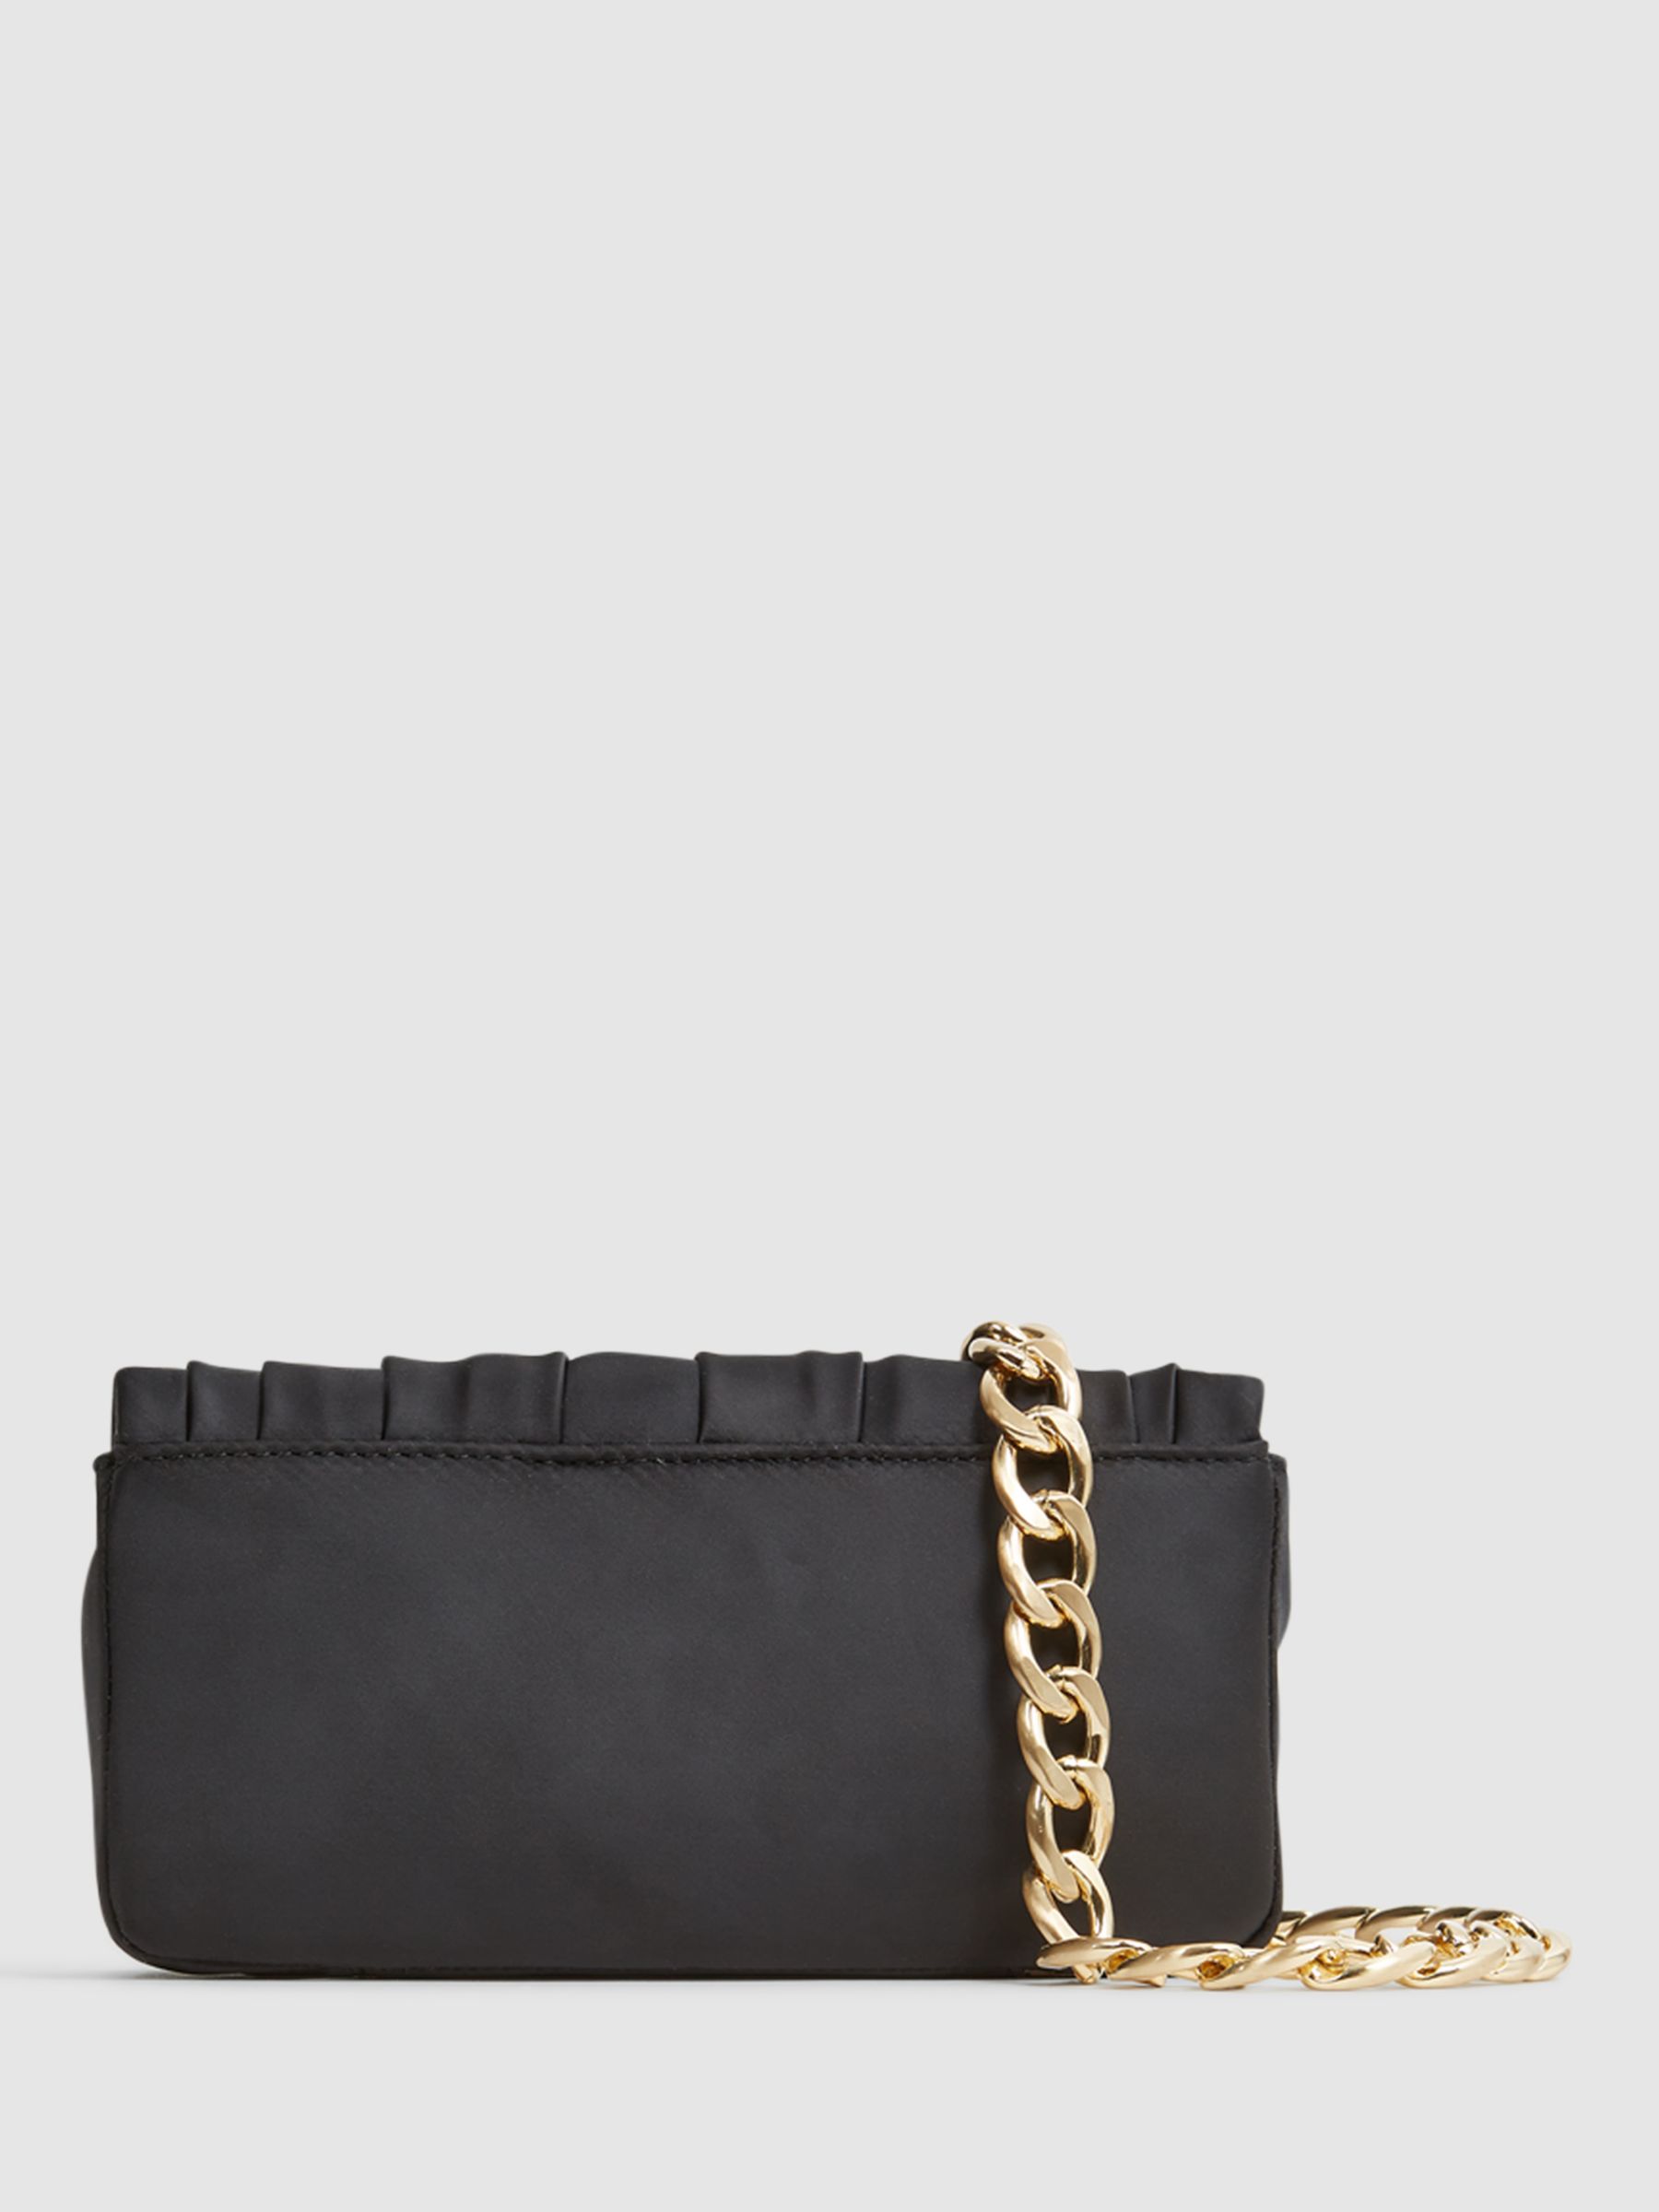 Reiss Camille Satin Pleated Clutch Bag, Black at John Lewis & Partners